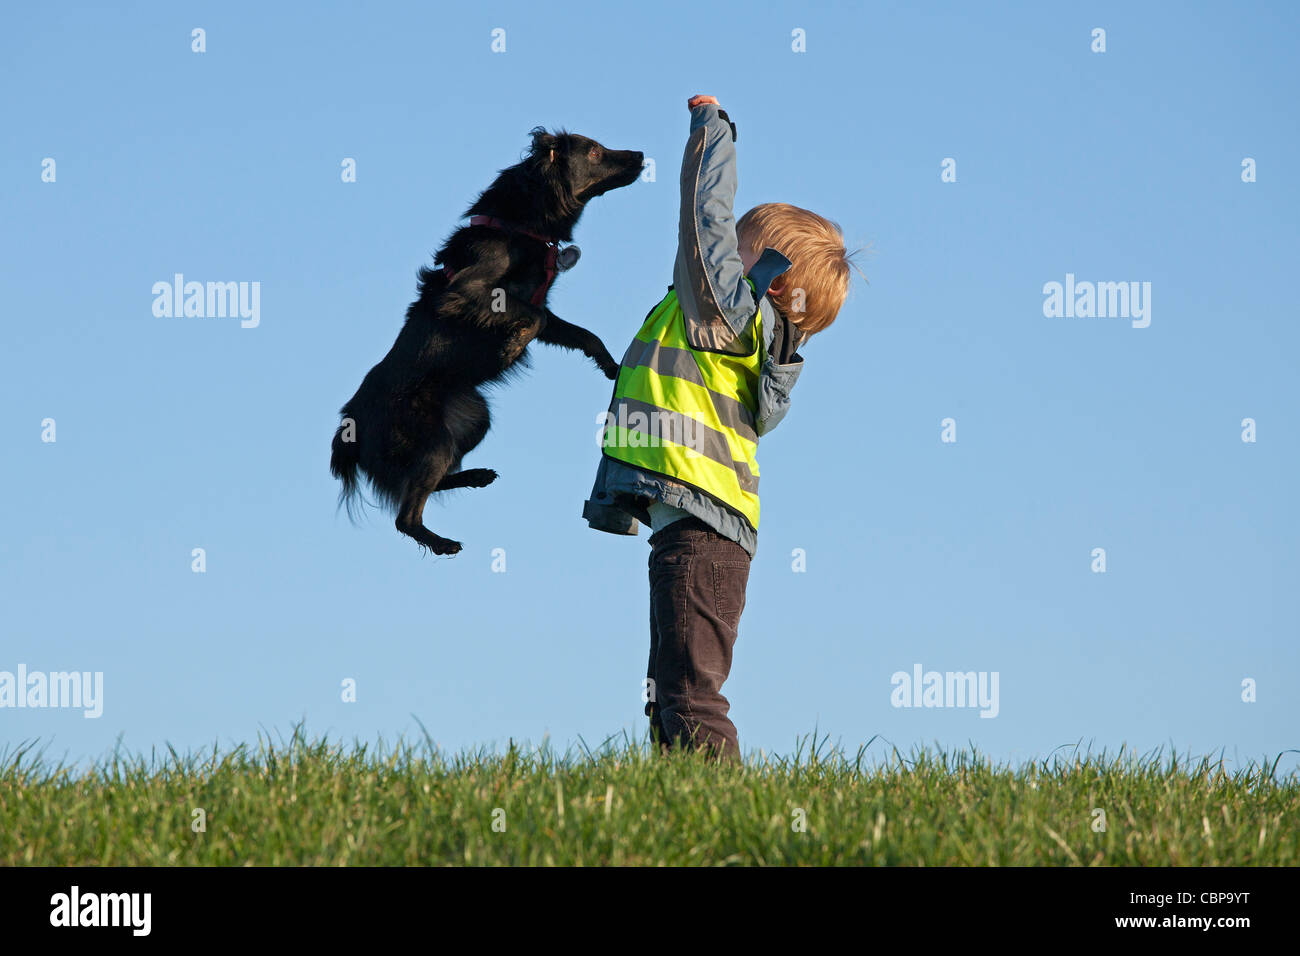 young boy playing with a dog Stock Photo